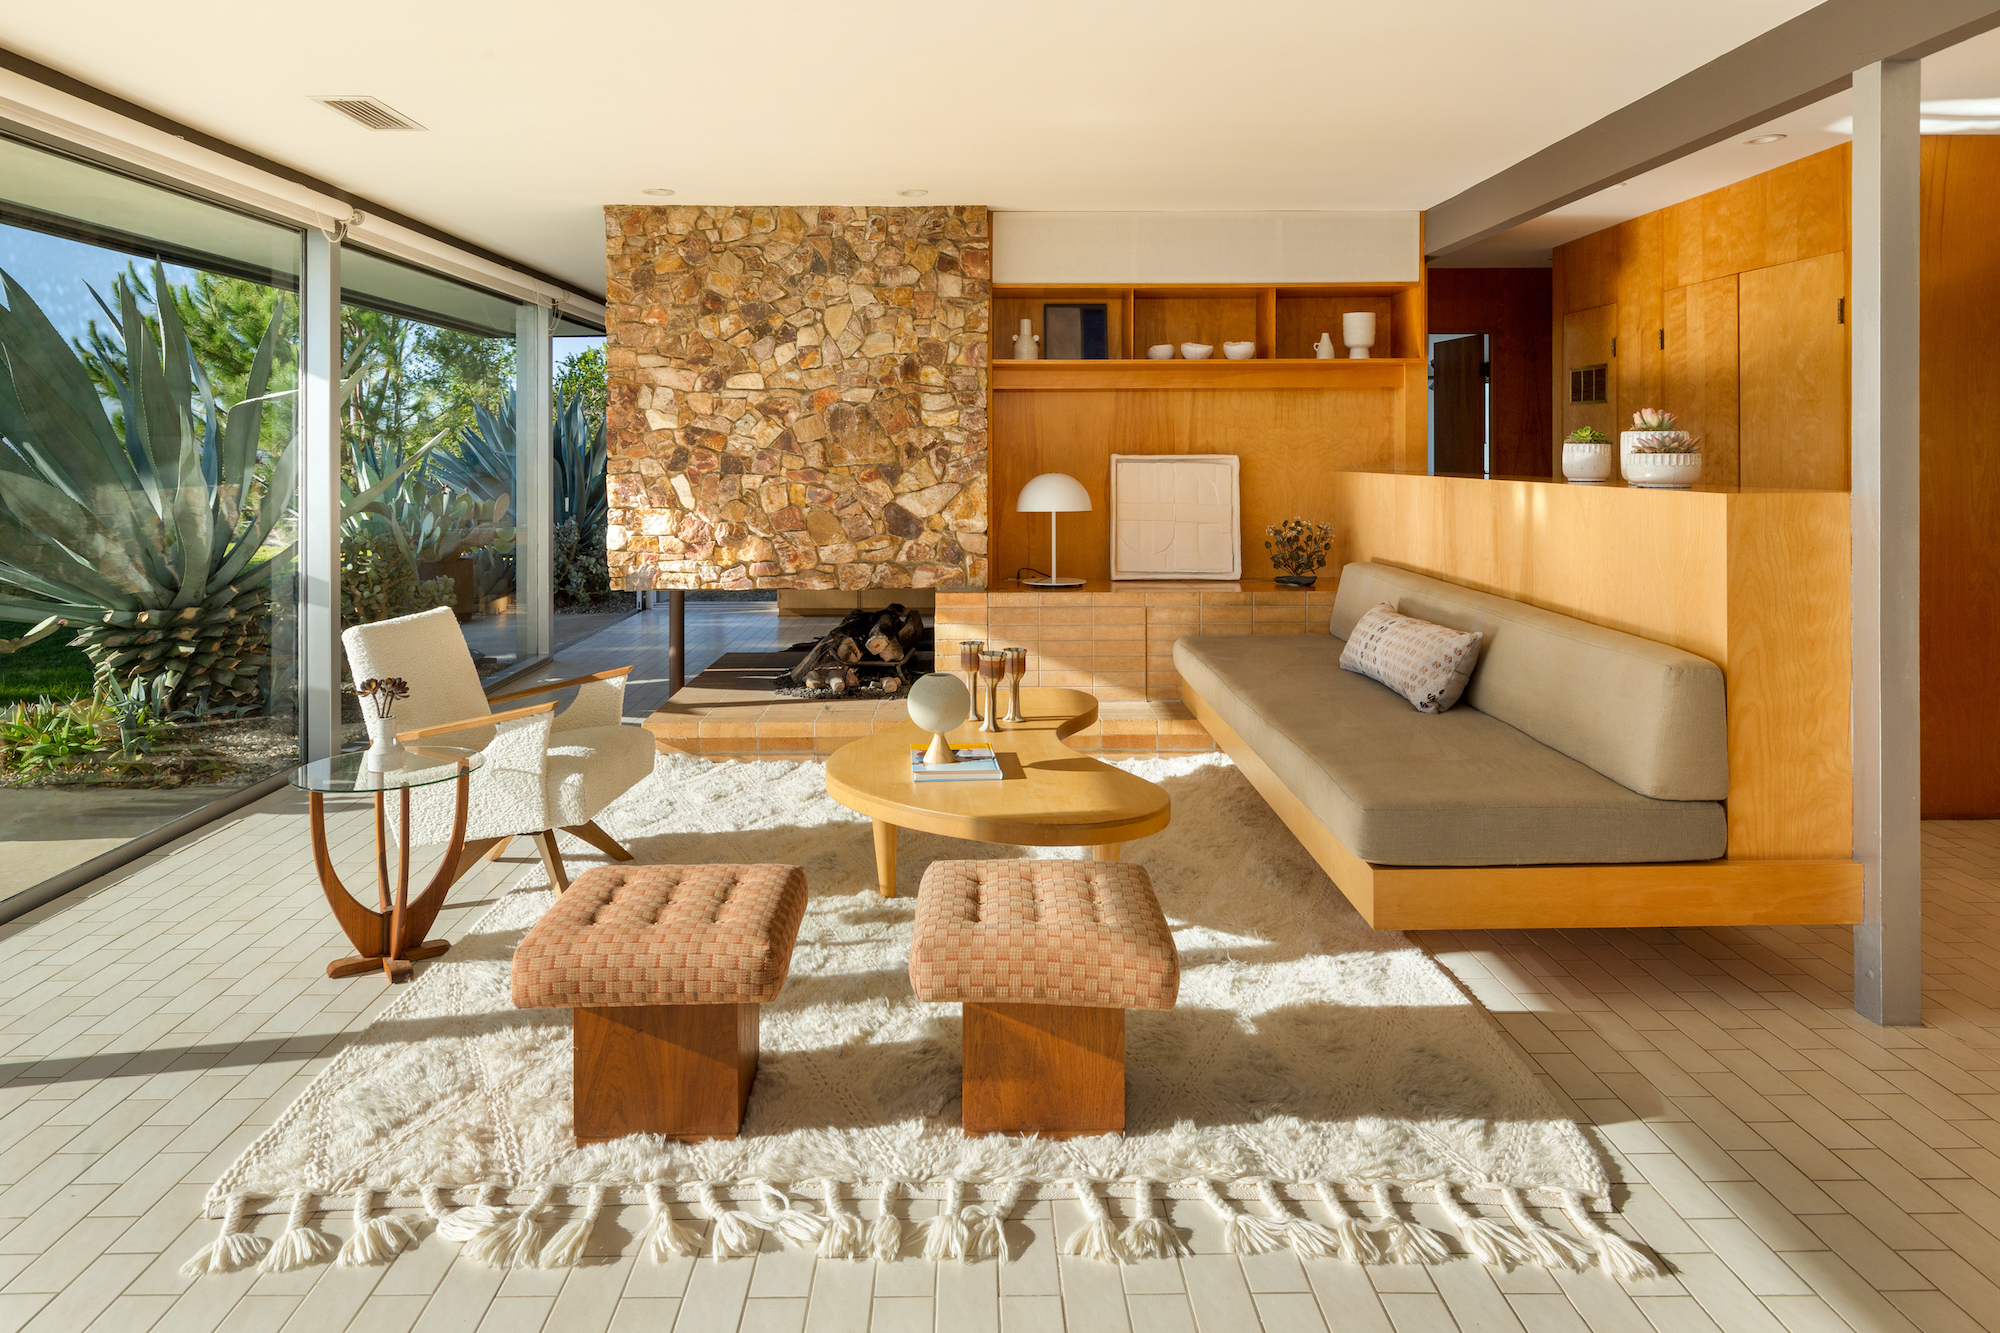 Serulnic House in Los Angeles by architect Richard Neutra in Effect Magazine